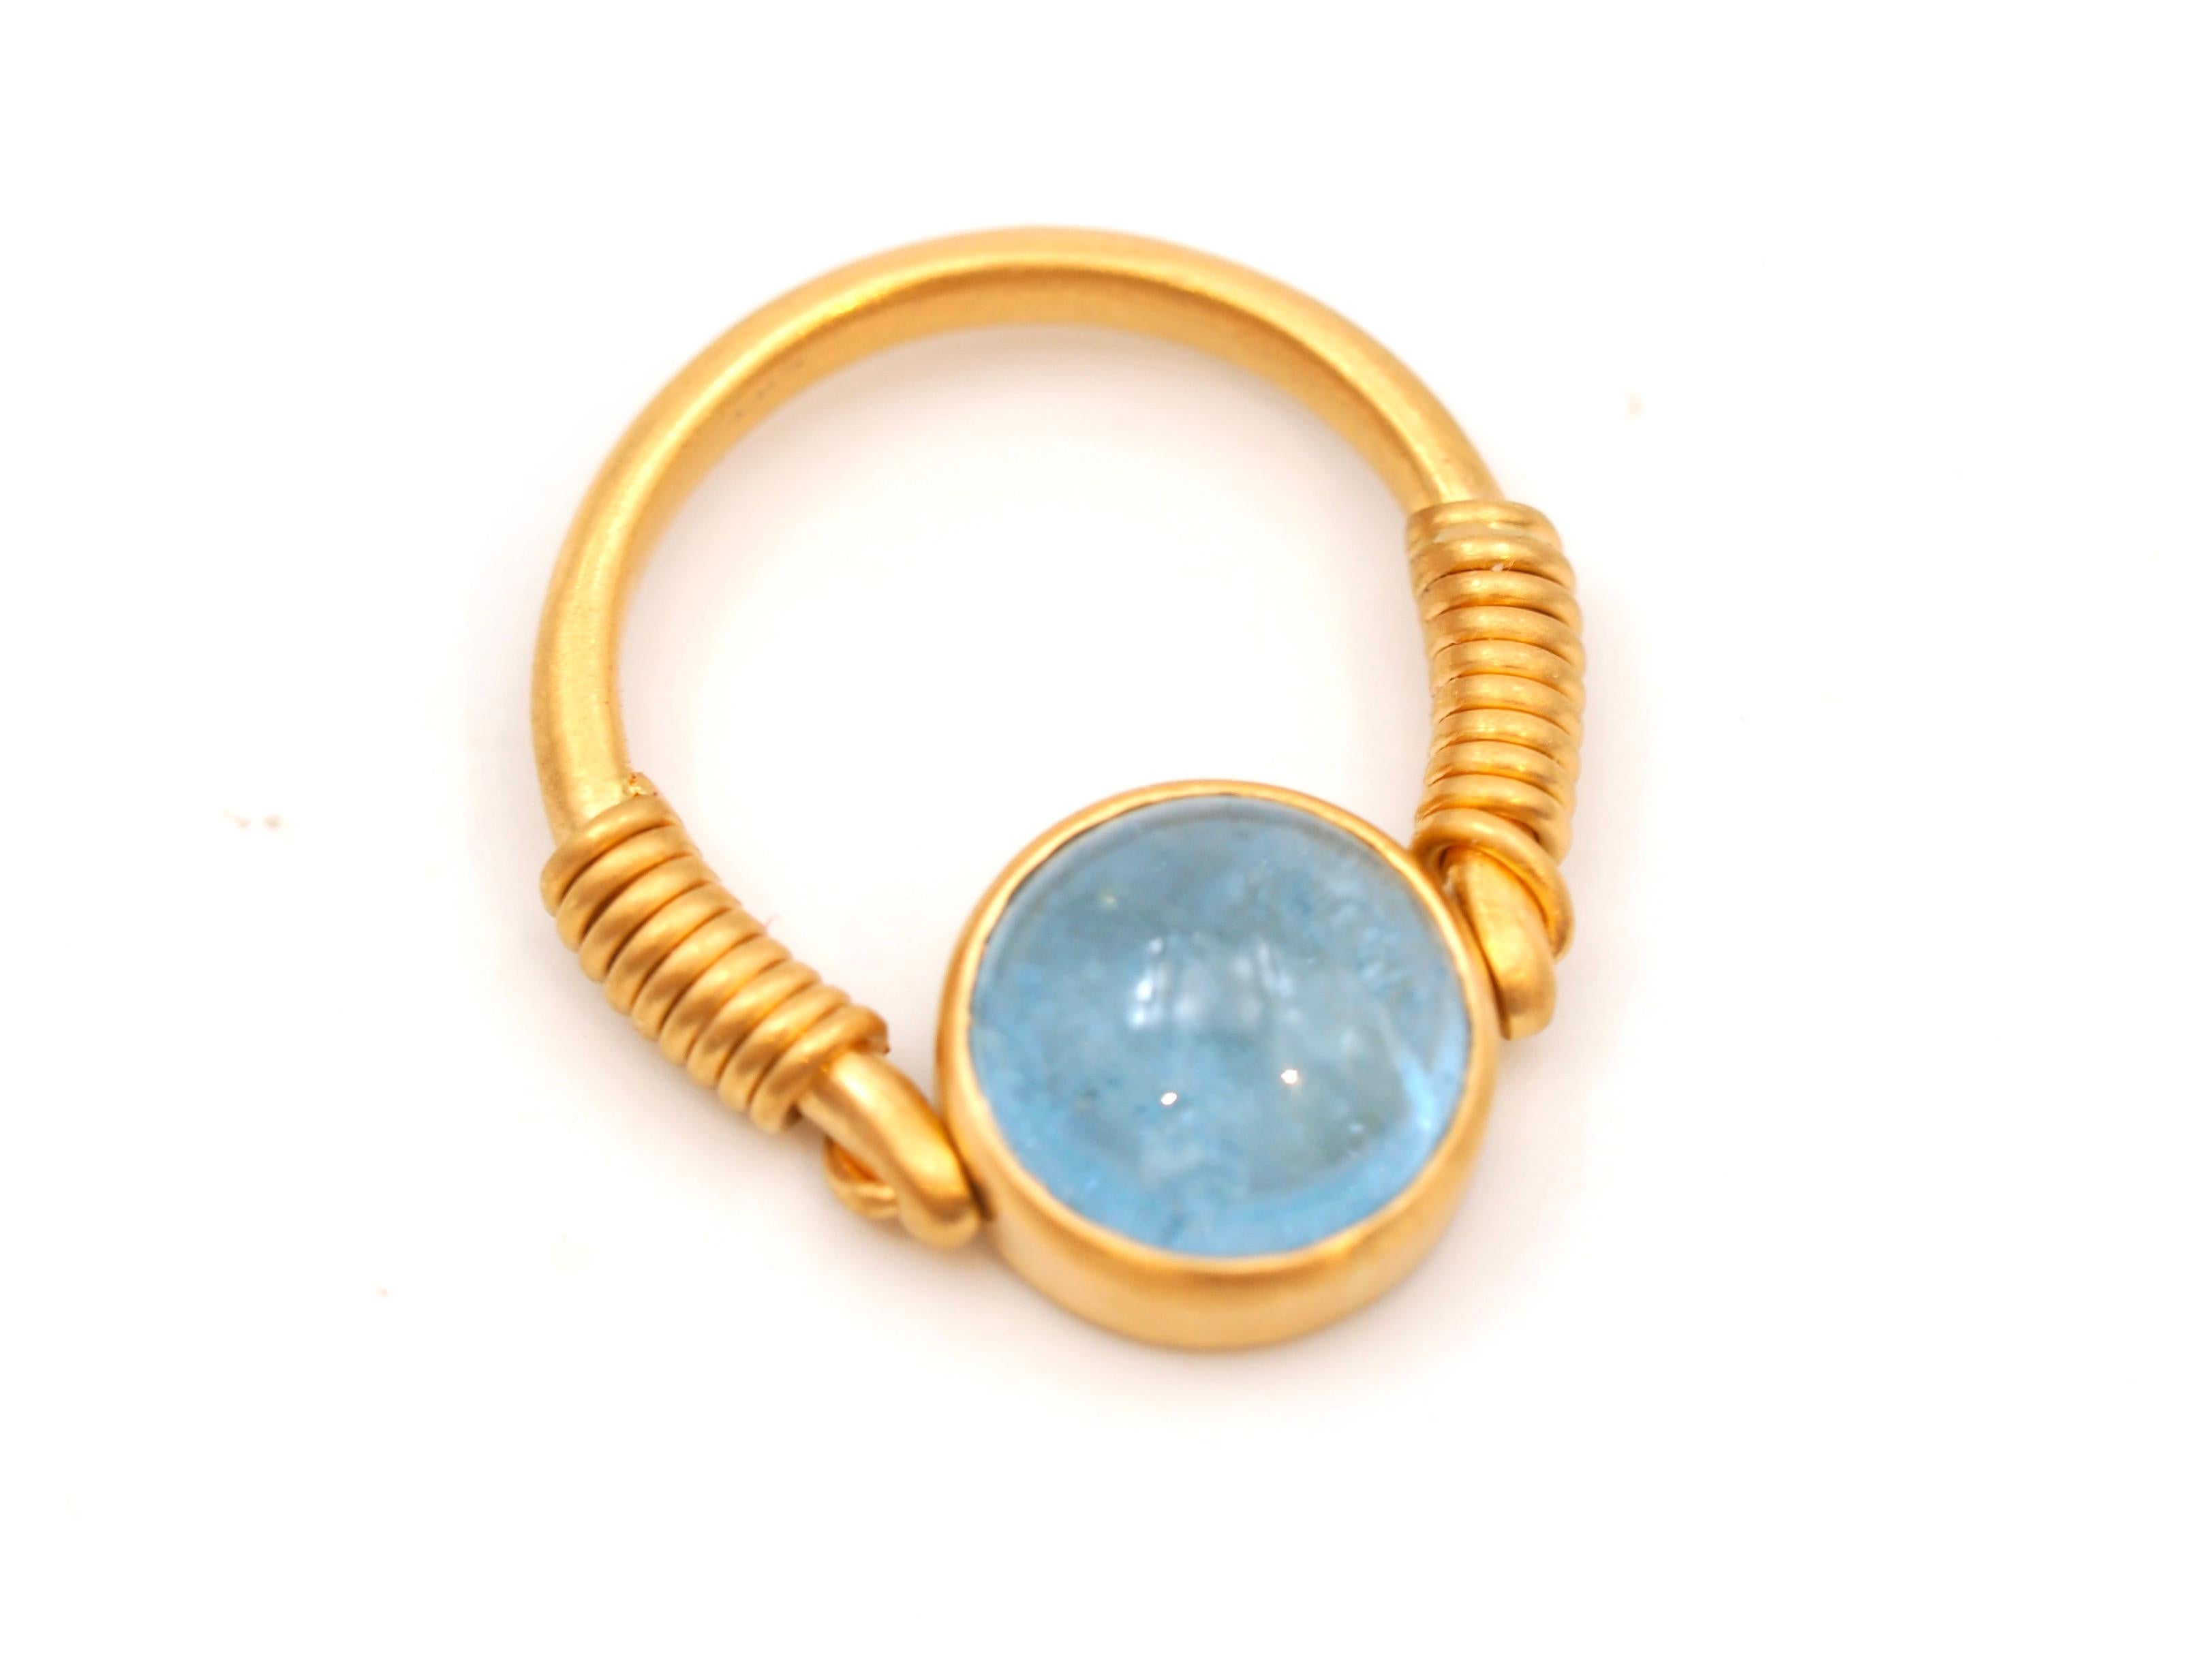 This antic style ring by Scrives is set with an aquamarine cabochon of 3.74cts. The stone is natural with no treatment. It shows visible natural inclusions.  
The stone is set in a 22kt gold settle and can turn arrowed the gold wire so it gives more